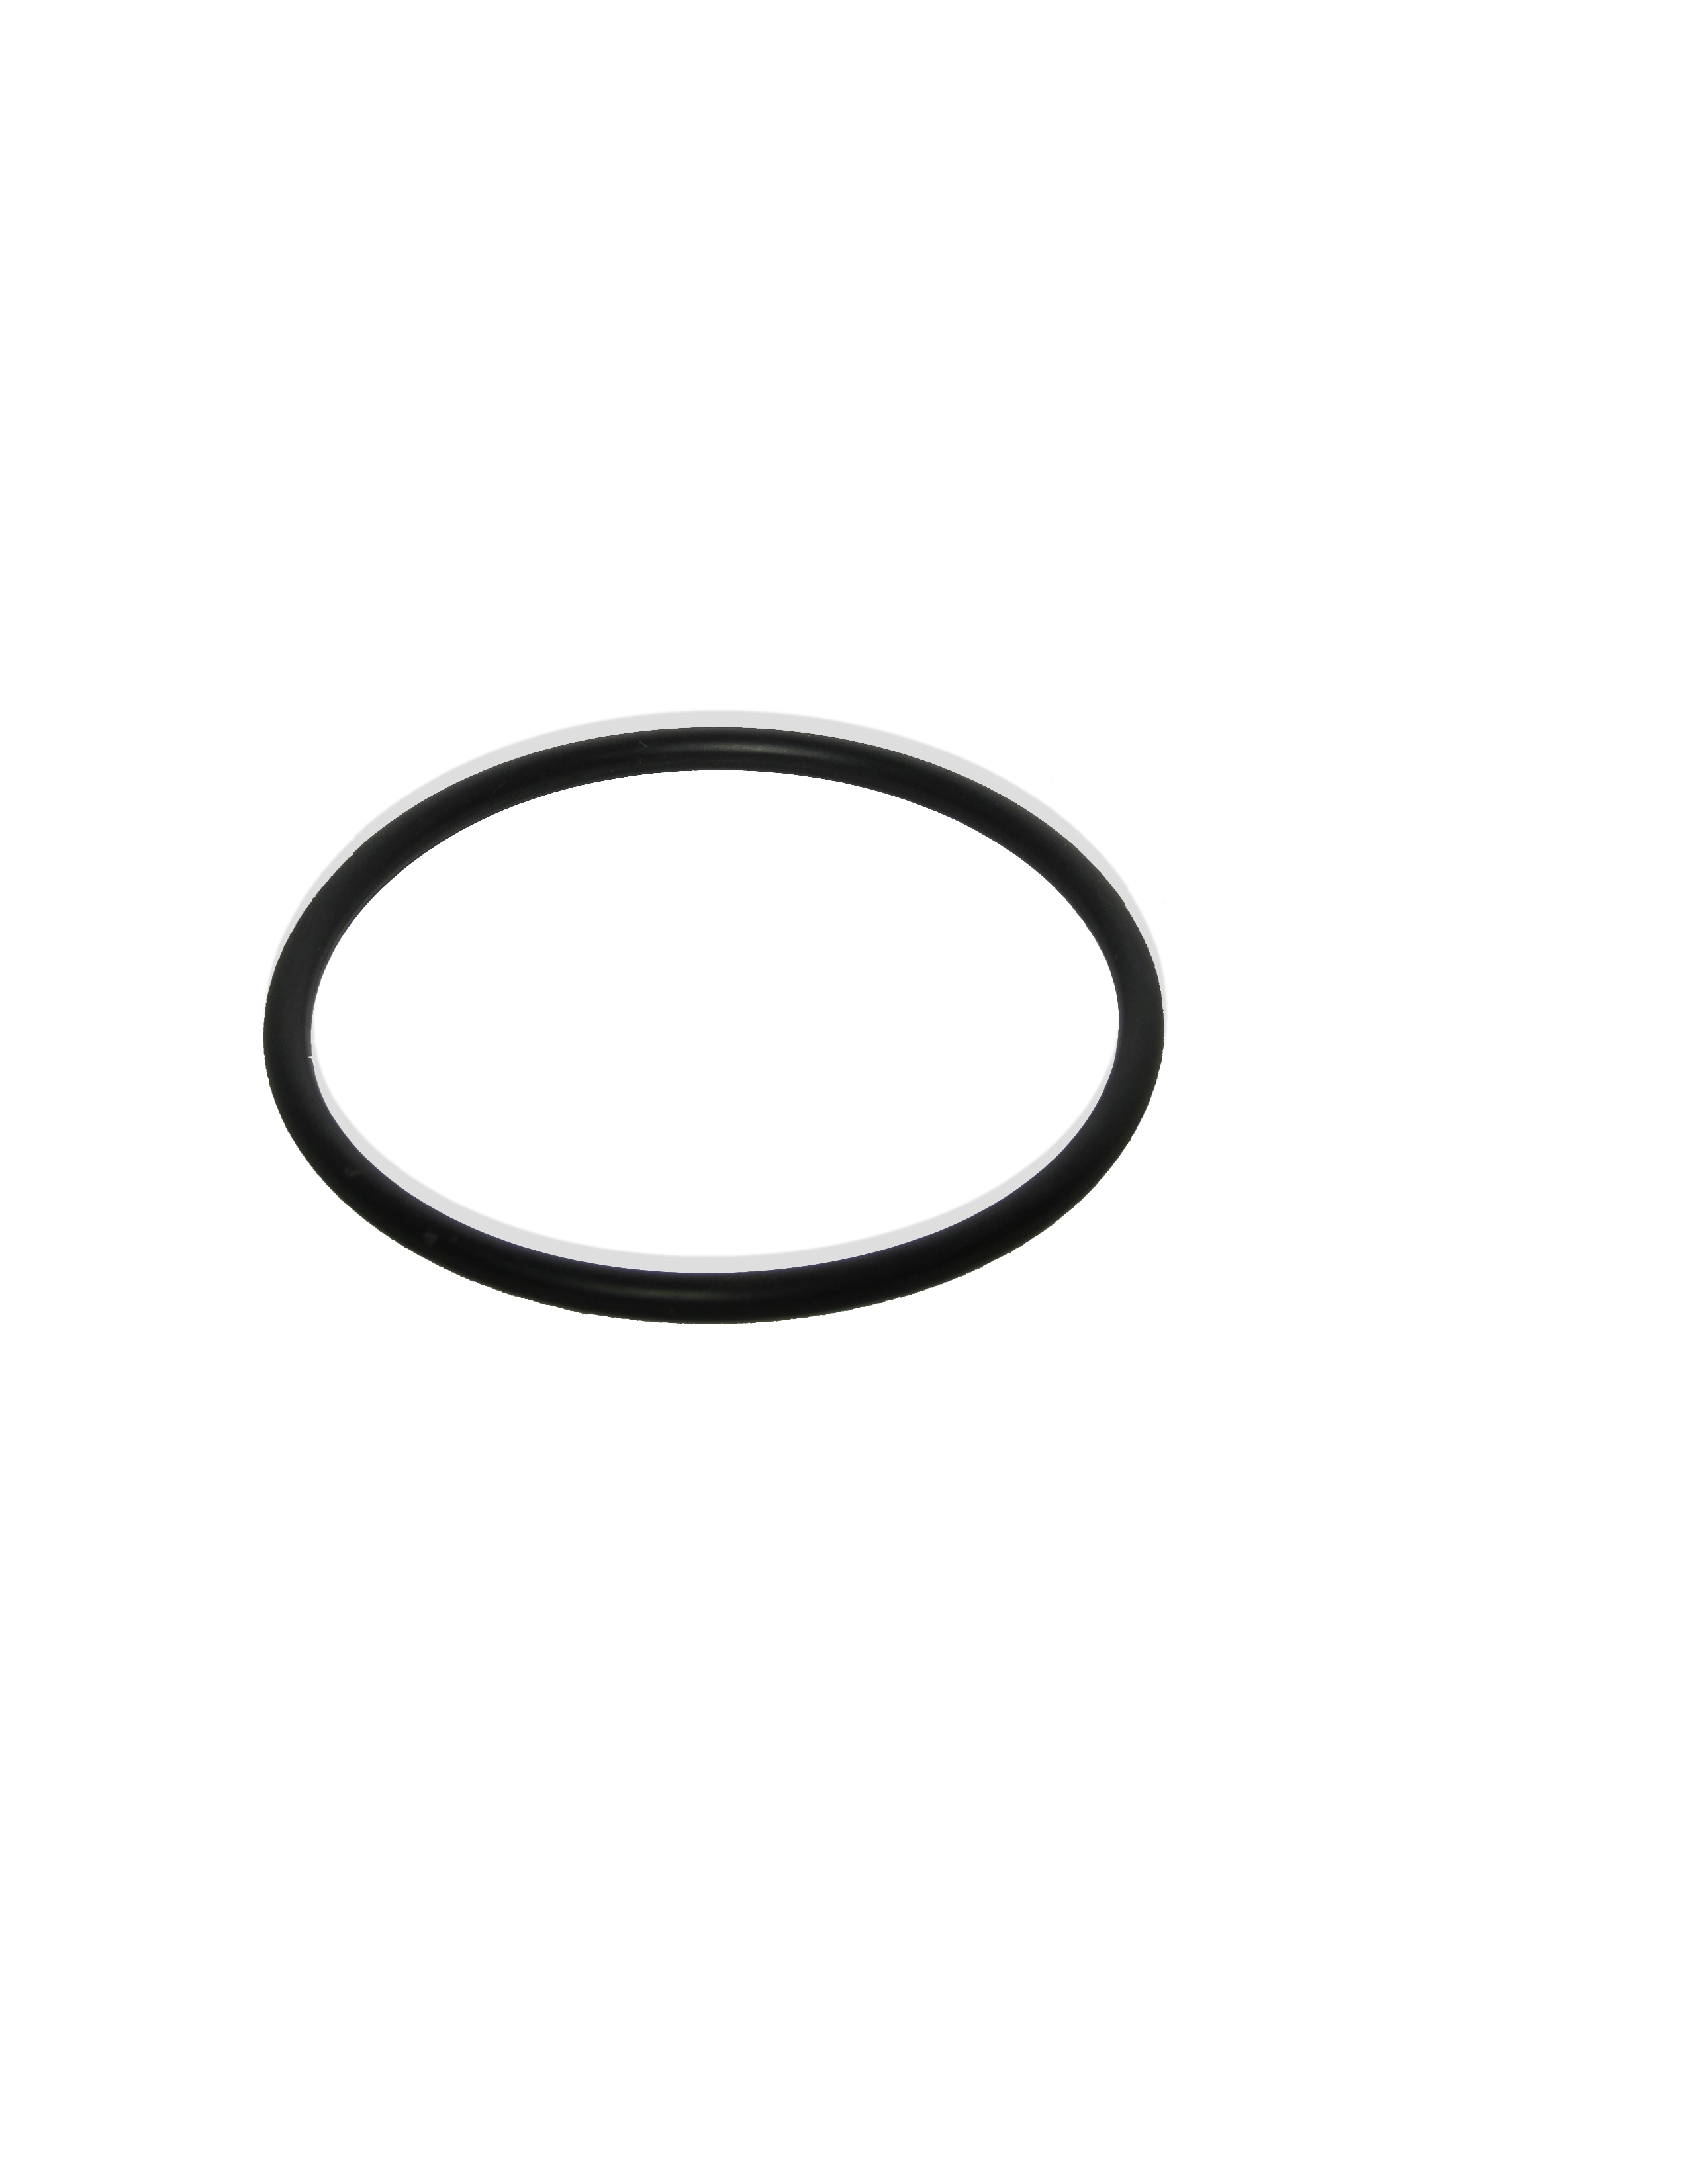 568-342 replacement large o-ring for AO5C 5C collet fixture, replacement large o-ring for AO5C 5C collet fixture, AO5C 5C collet fixture, 5C collet fixture, collet fixture